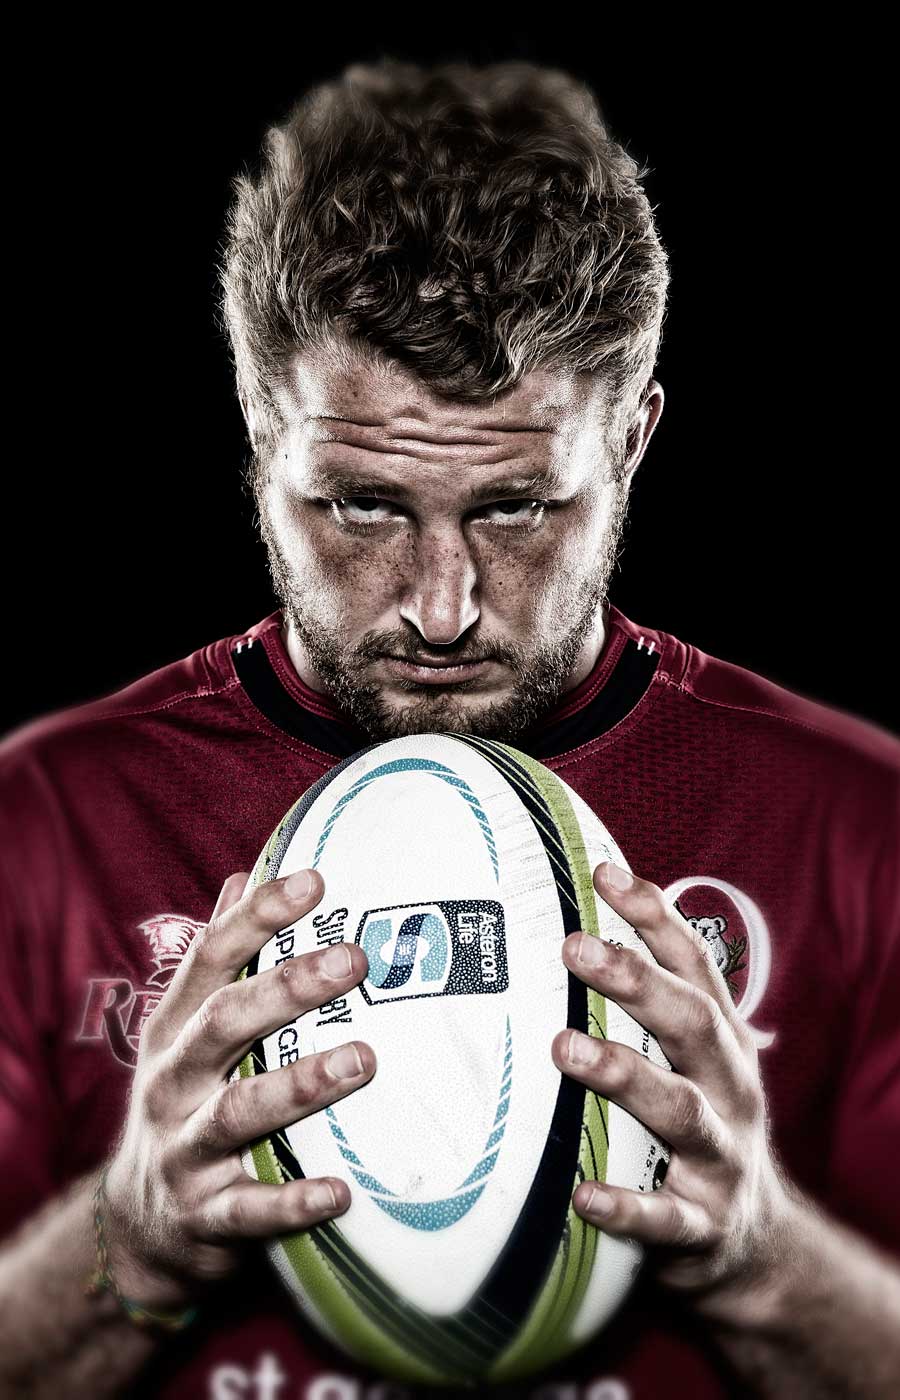 Queensland's James Slipper poses during a Reds portrait session